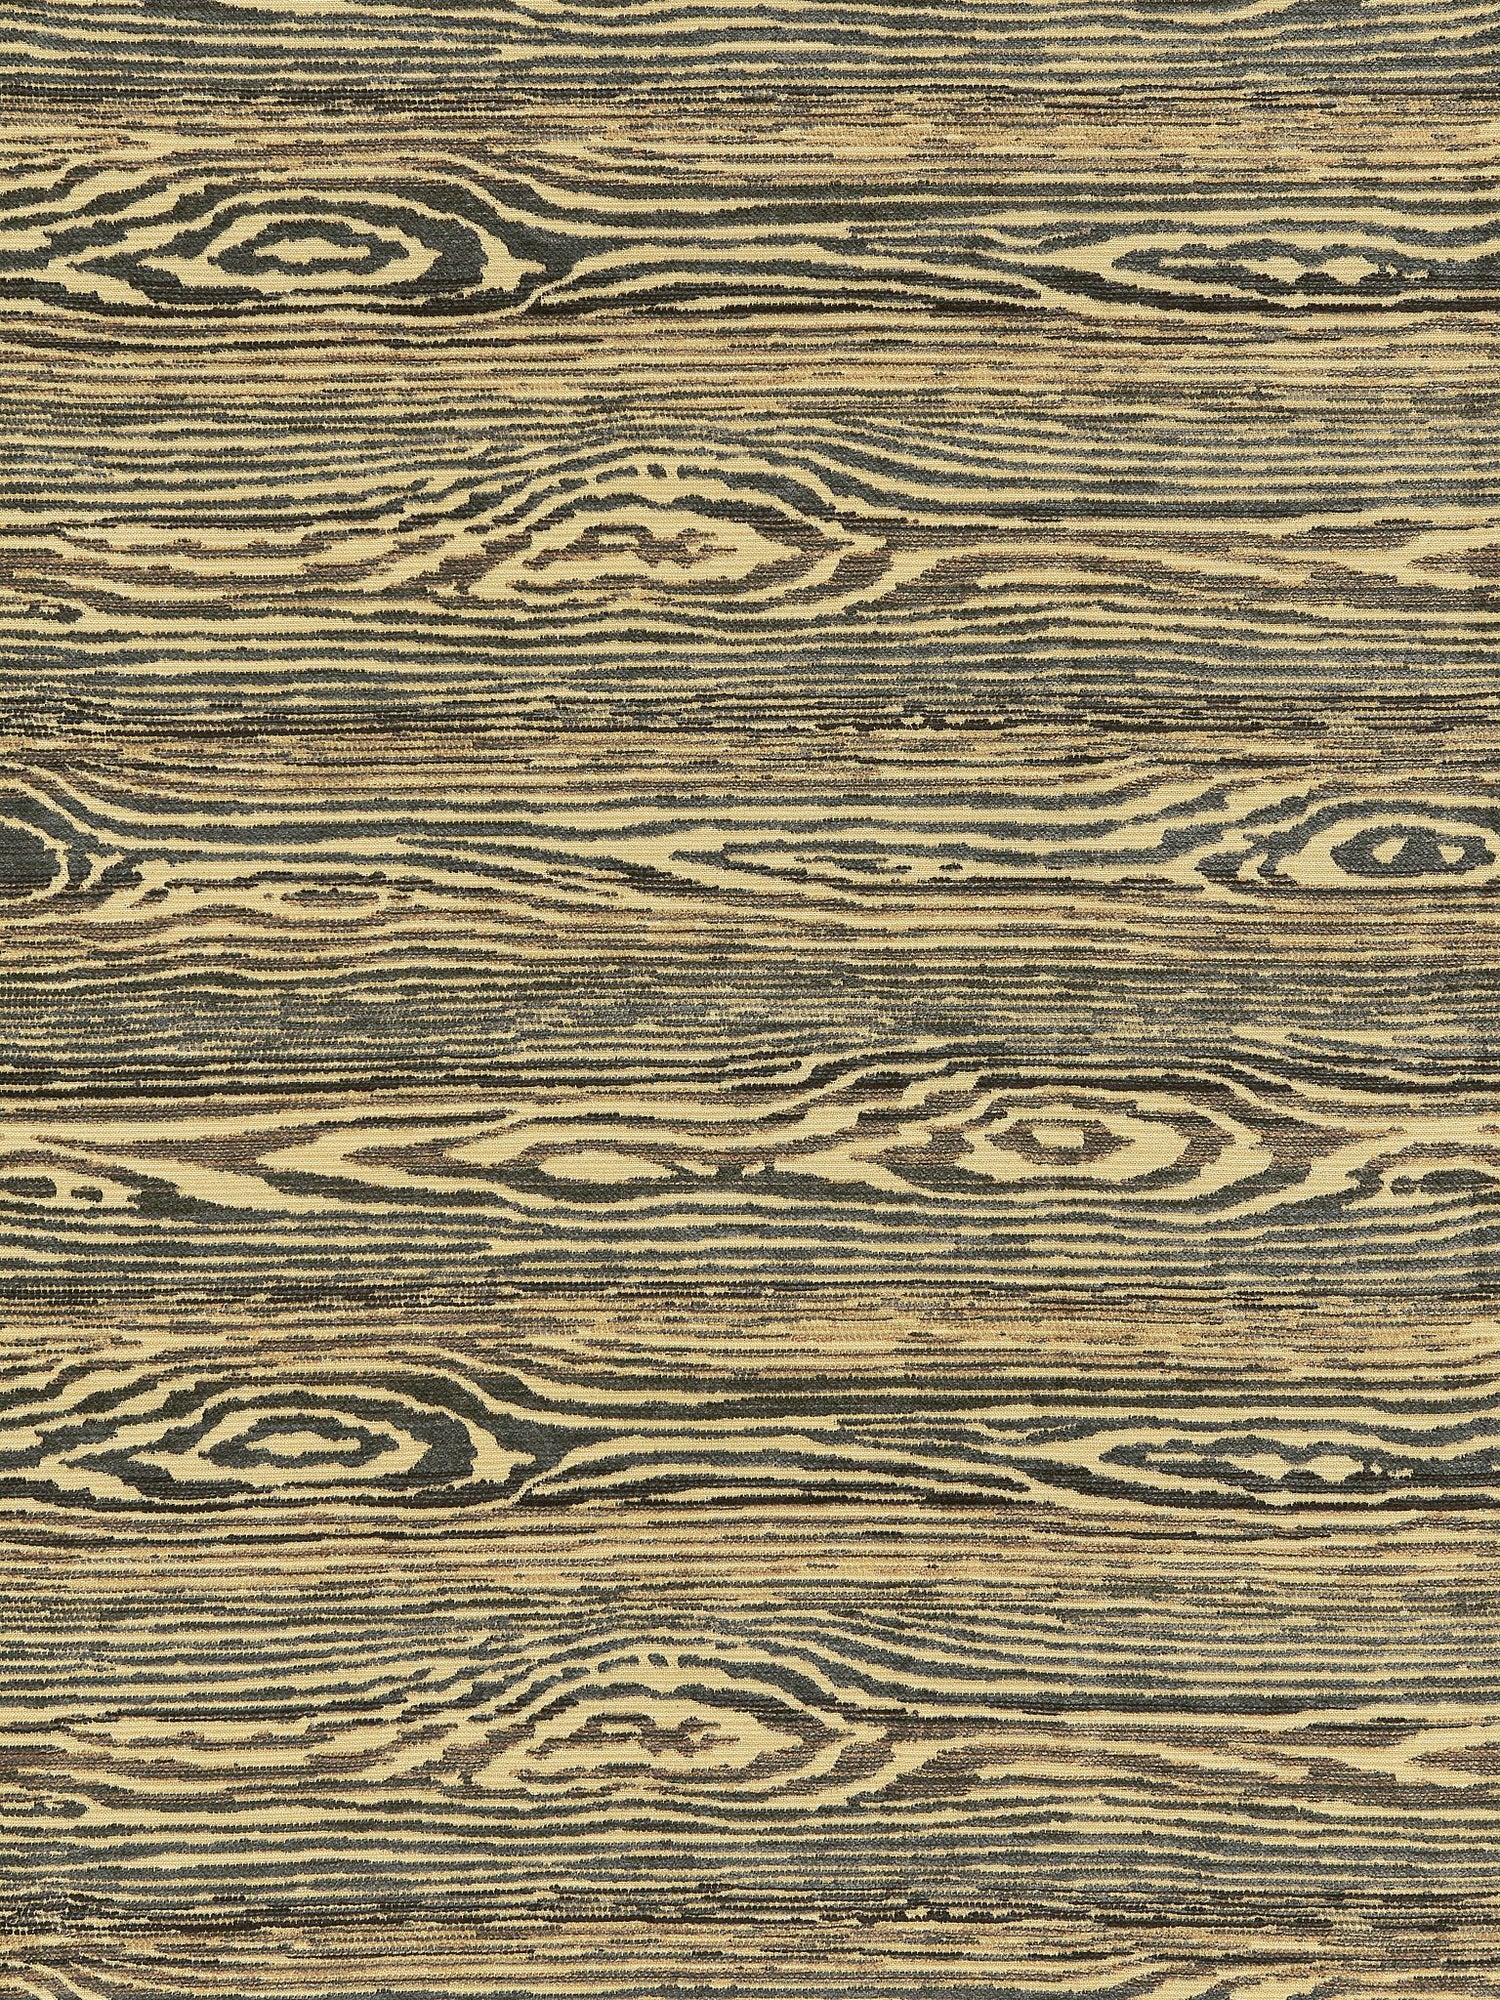 Muir Woods fabric in ash color - pattern number CD 0004OB41 - by Scalamandre in the Old World Weavers collection